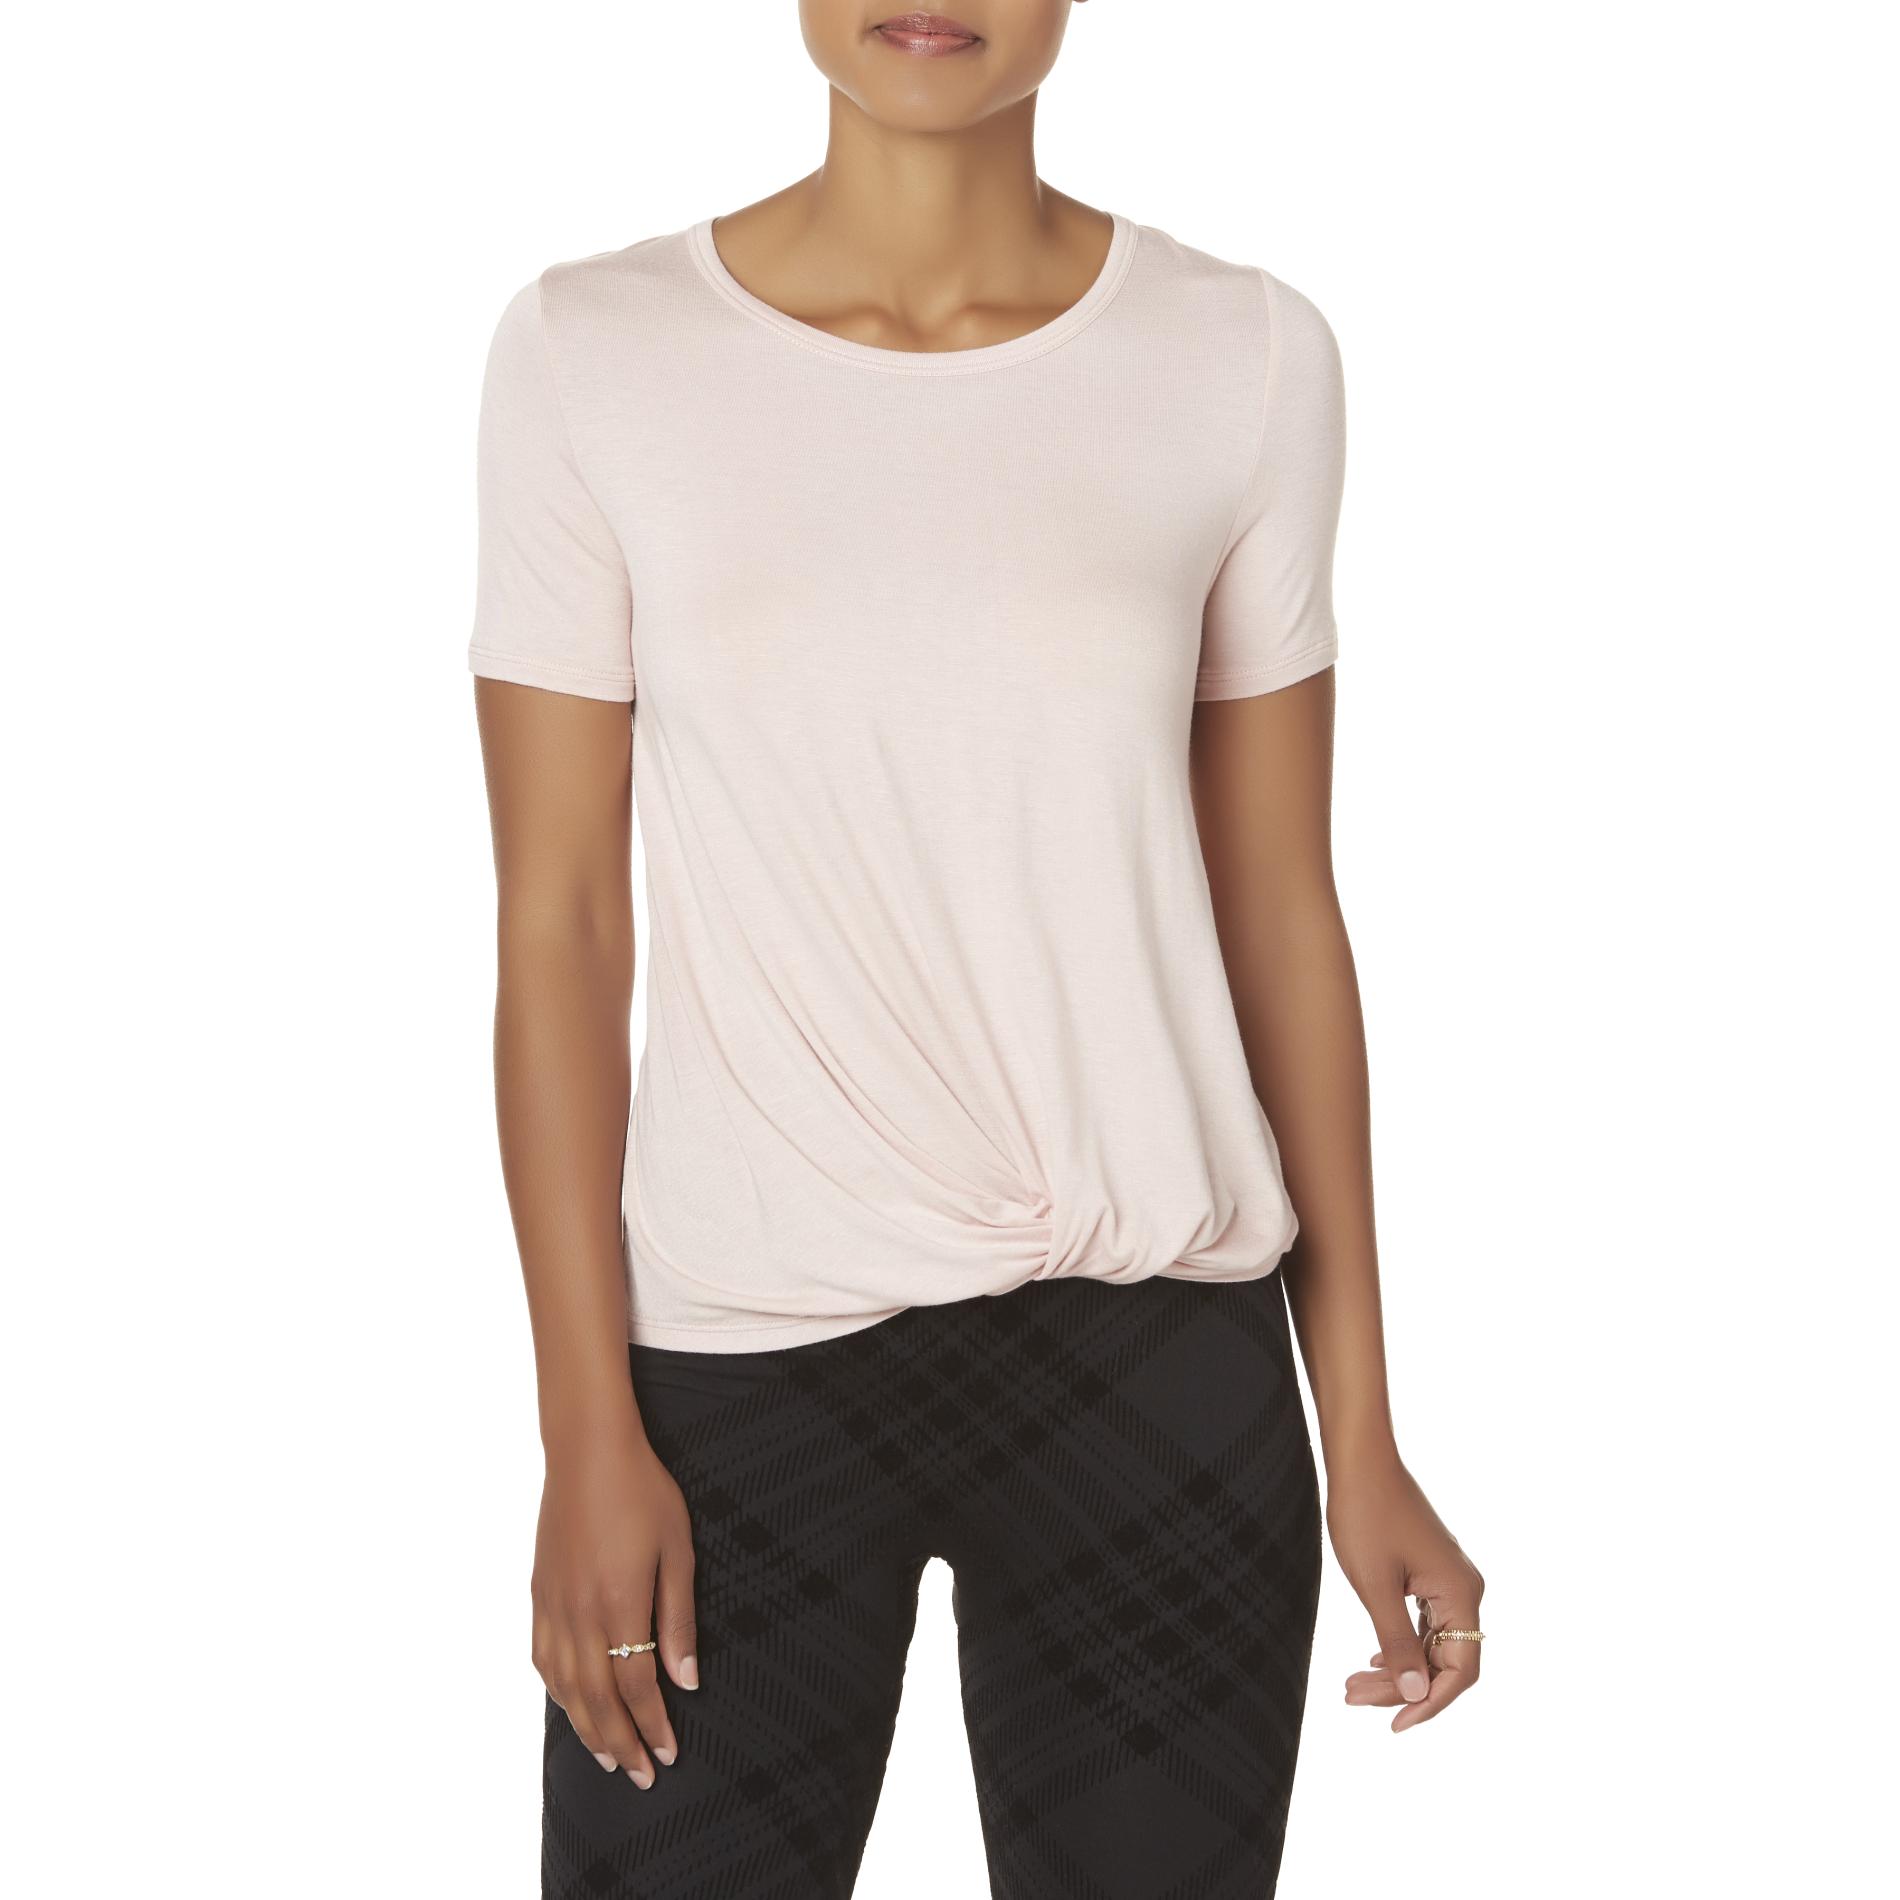 Simply Styled Women's Twist-Front Top